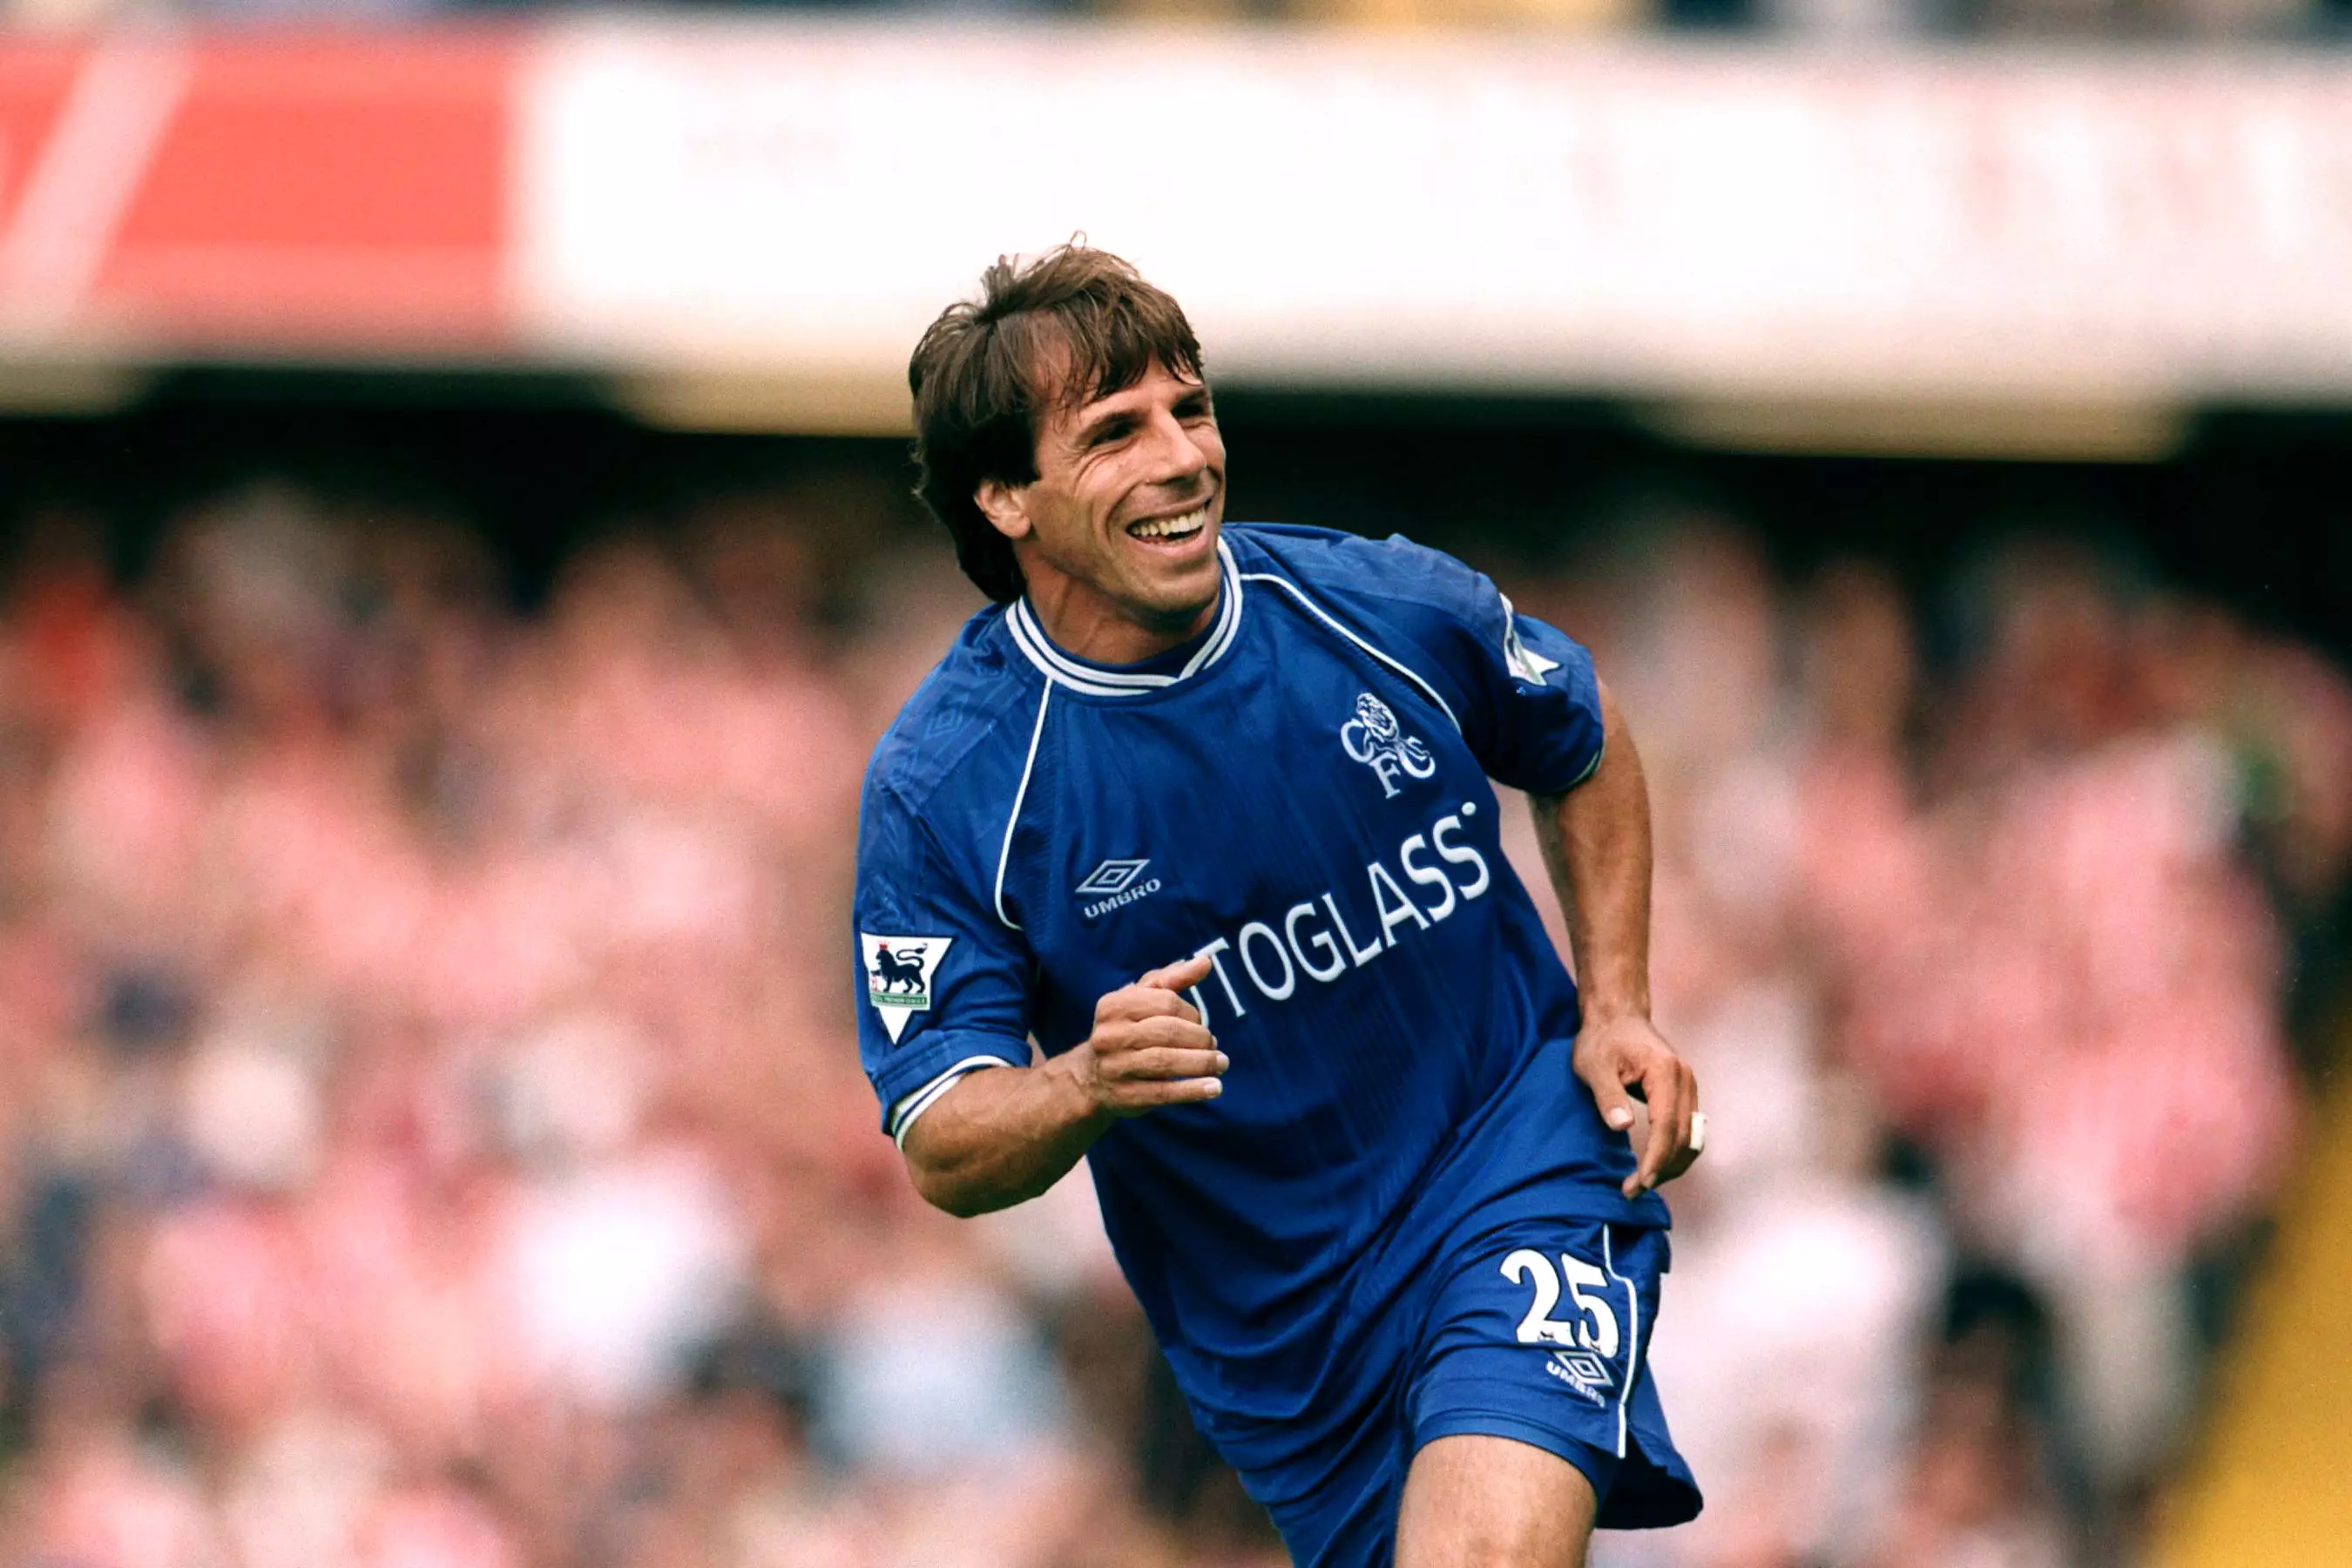 Zola played in a very different Chelsea team but was excellent. Image: PA Images